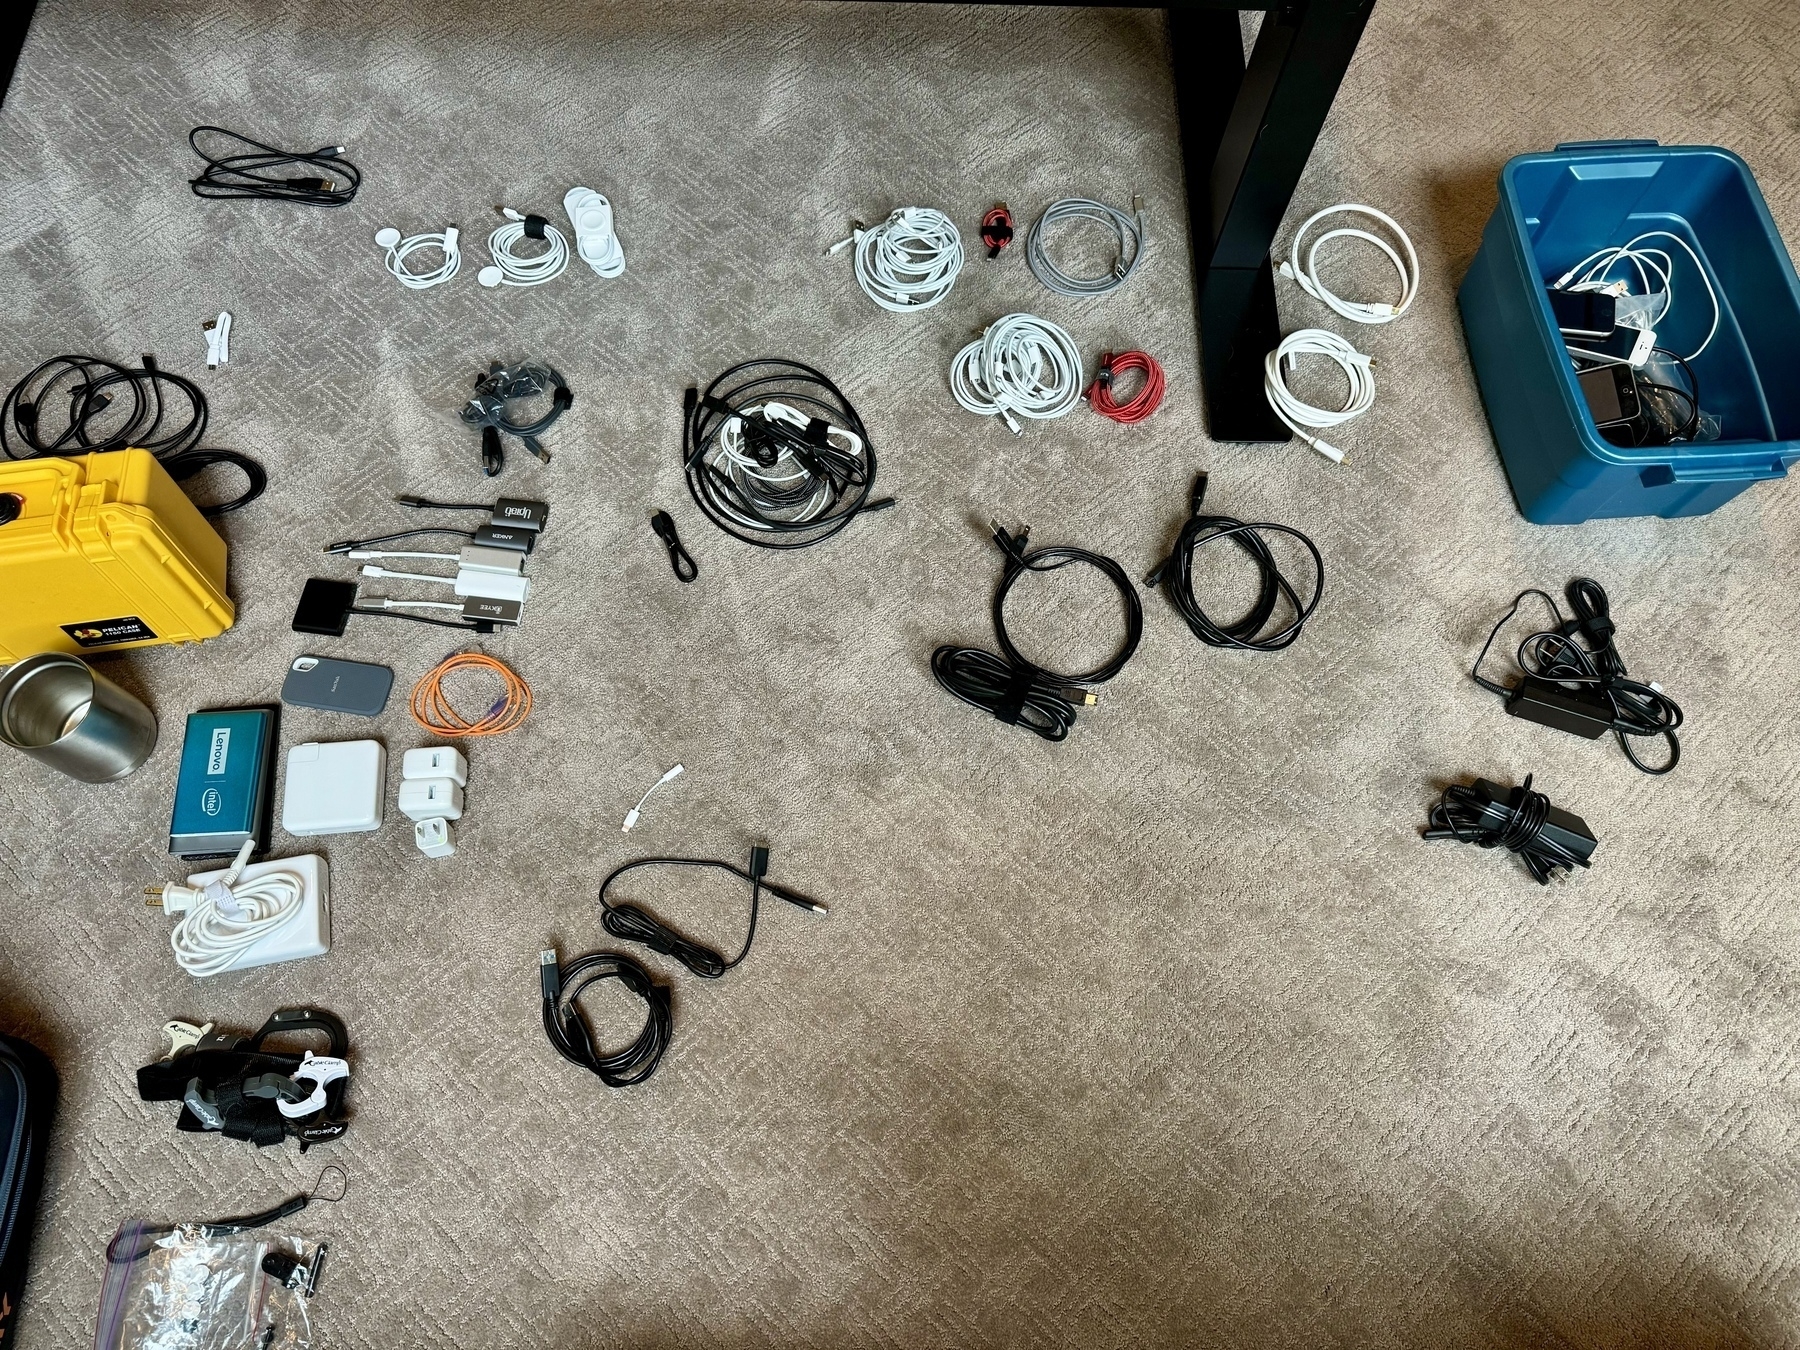 Photo of random cables, adapters and other tech gear that will be recycled 